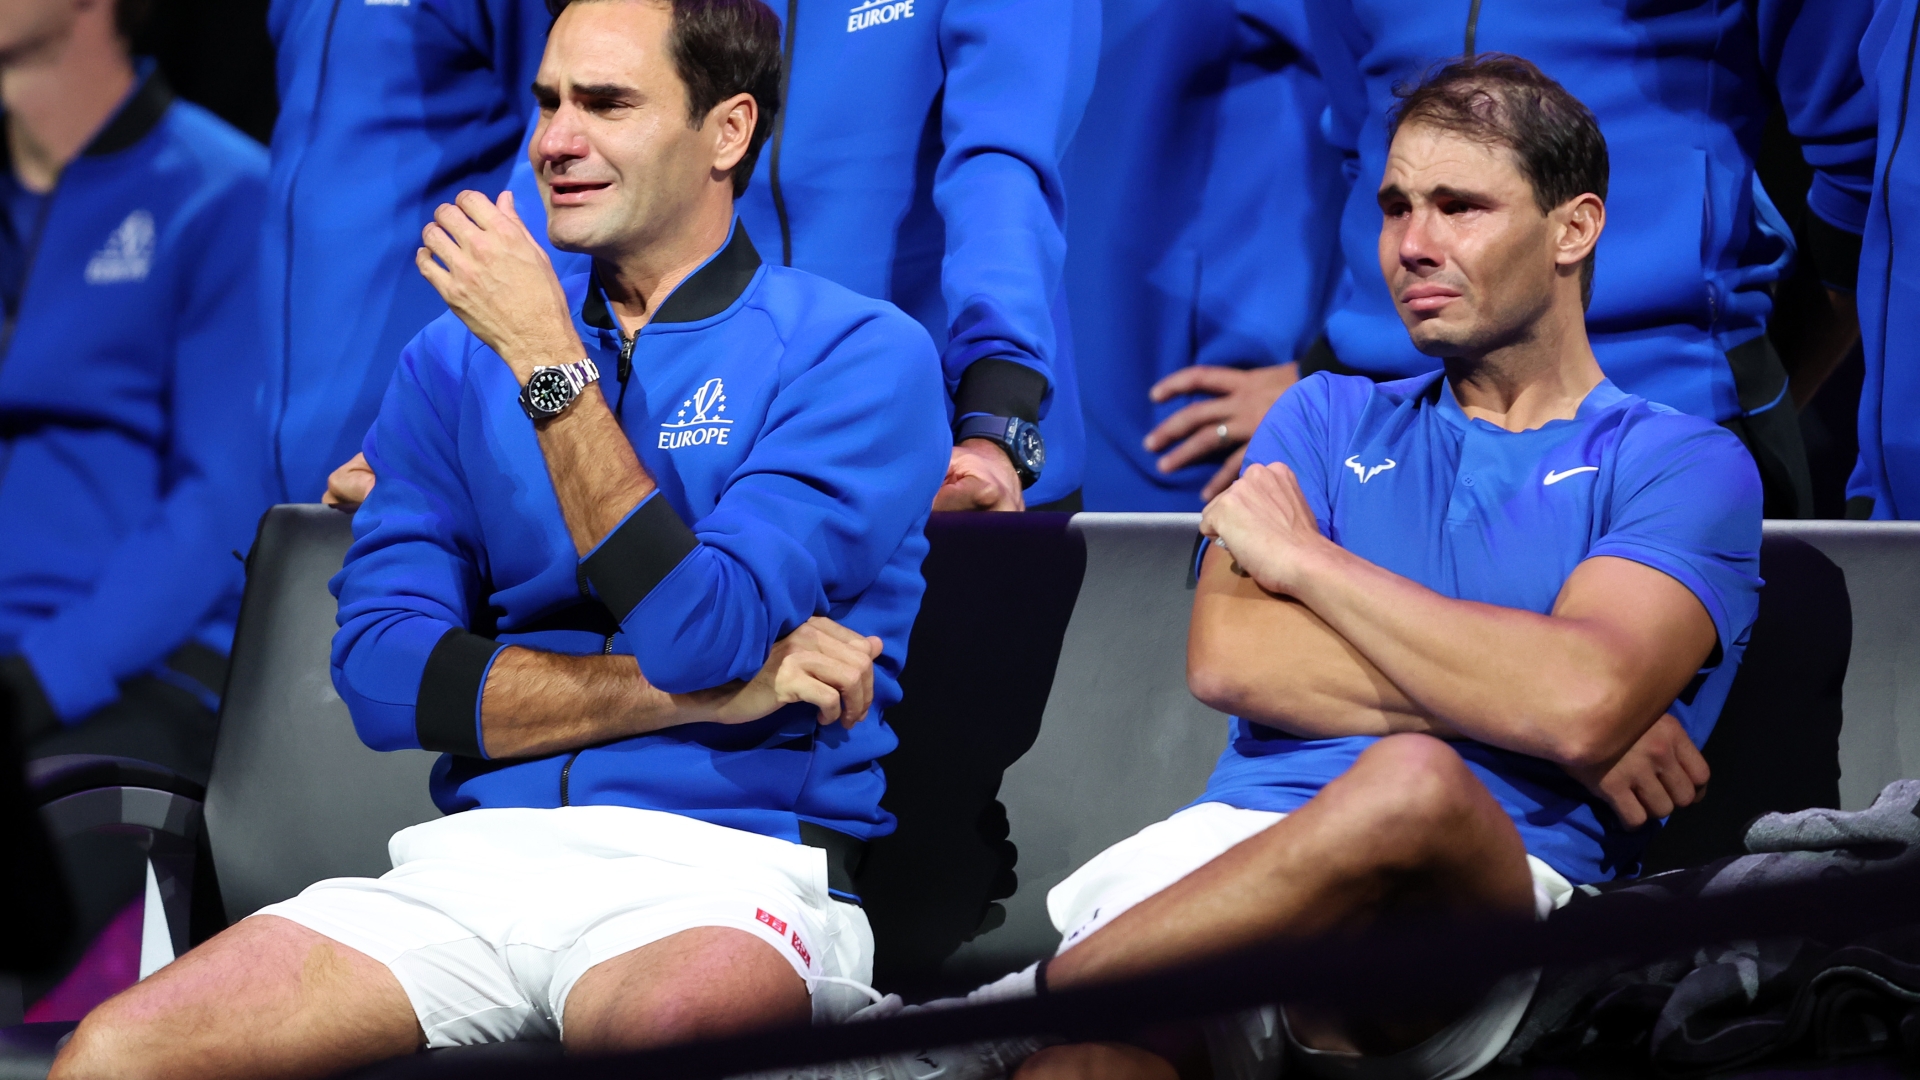 Rafael Nadal pulls out of Laver Cup for 'personal reasons' after putting stress of expecting first child aside to be part of Roger Federer's farewell at O2 Arena